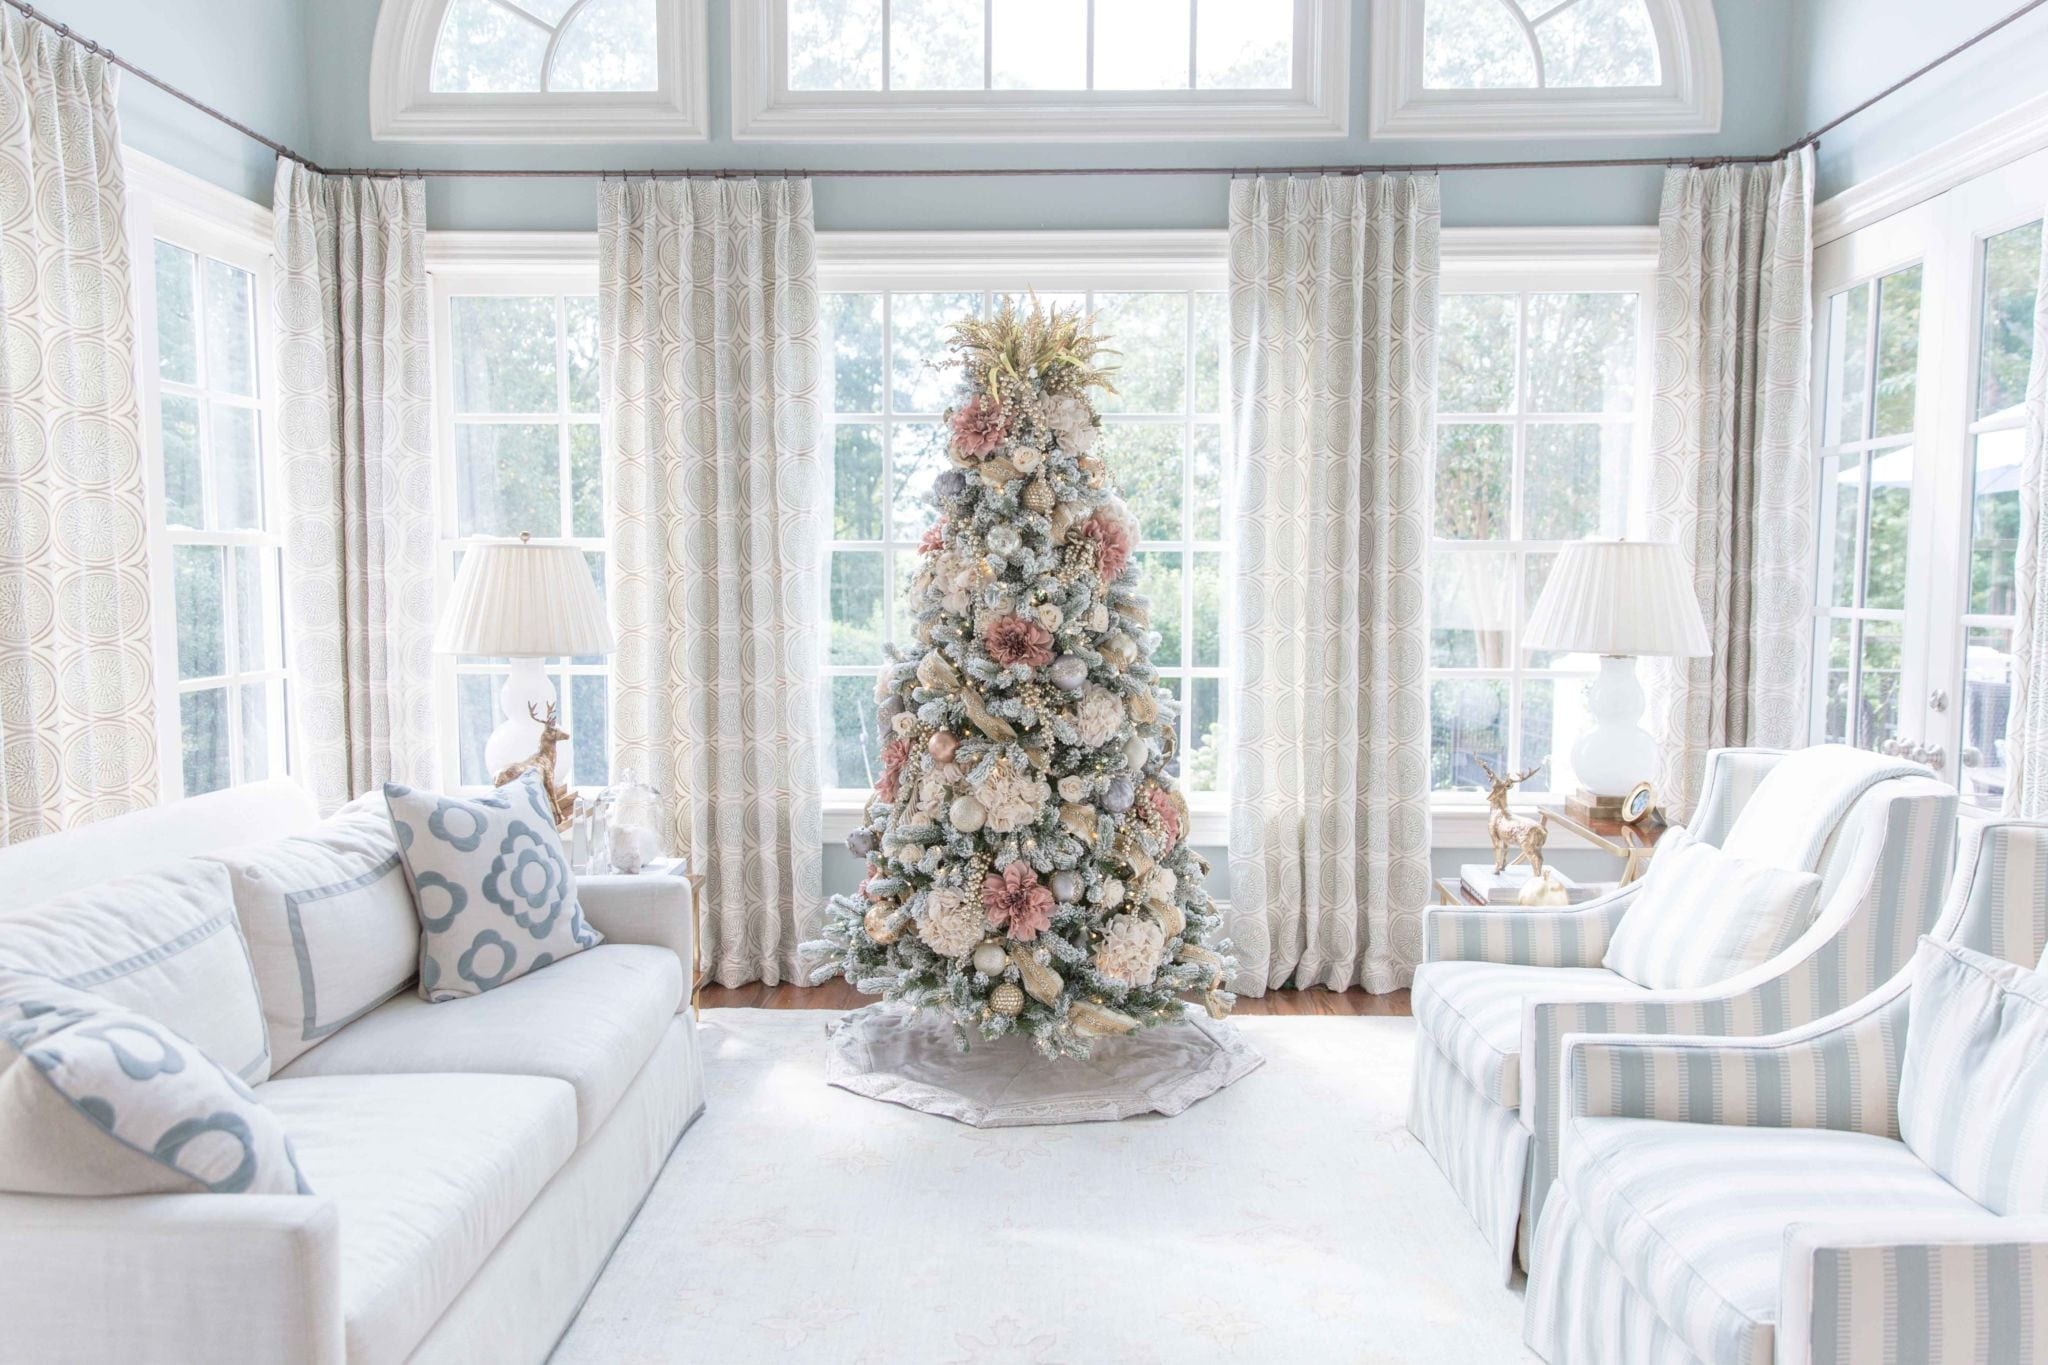 Pink Flocked Christmas Tree. Decorate your Christmas tree with faux flowers, ornate ribbon and stunning Frontgate ornaments. A tree of mauve and ivory is a unique and soft way to decorate your flocked Christmas Tree! Lots of Christmas Tree ideas coming this year!